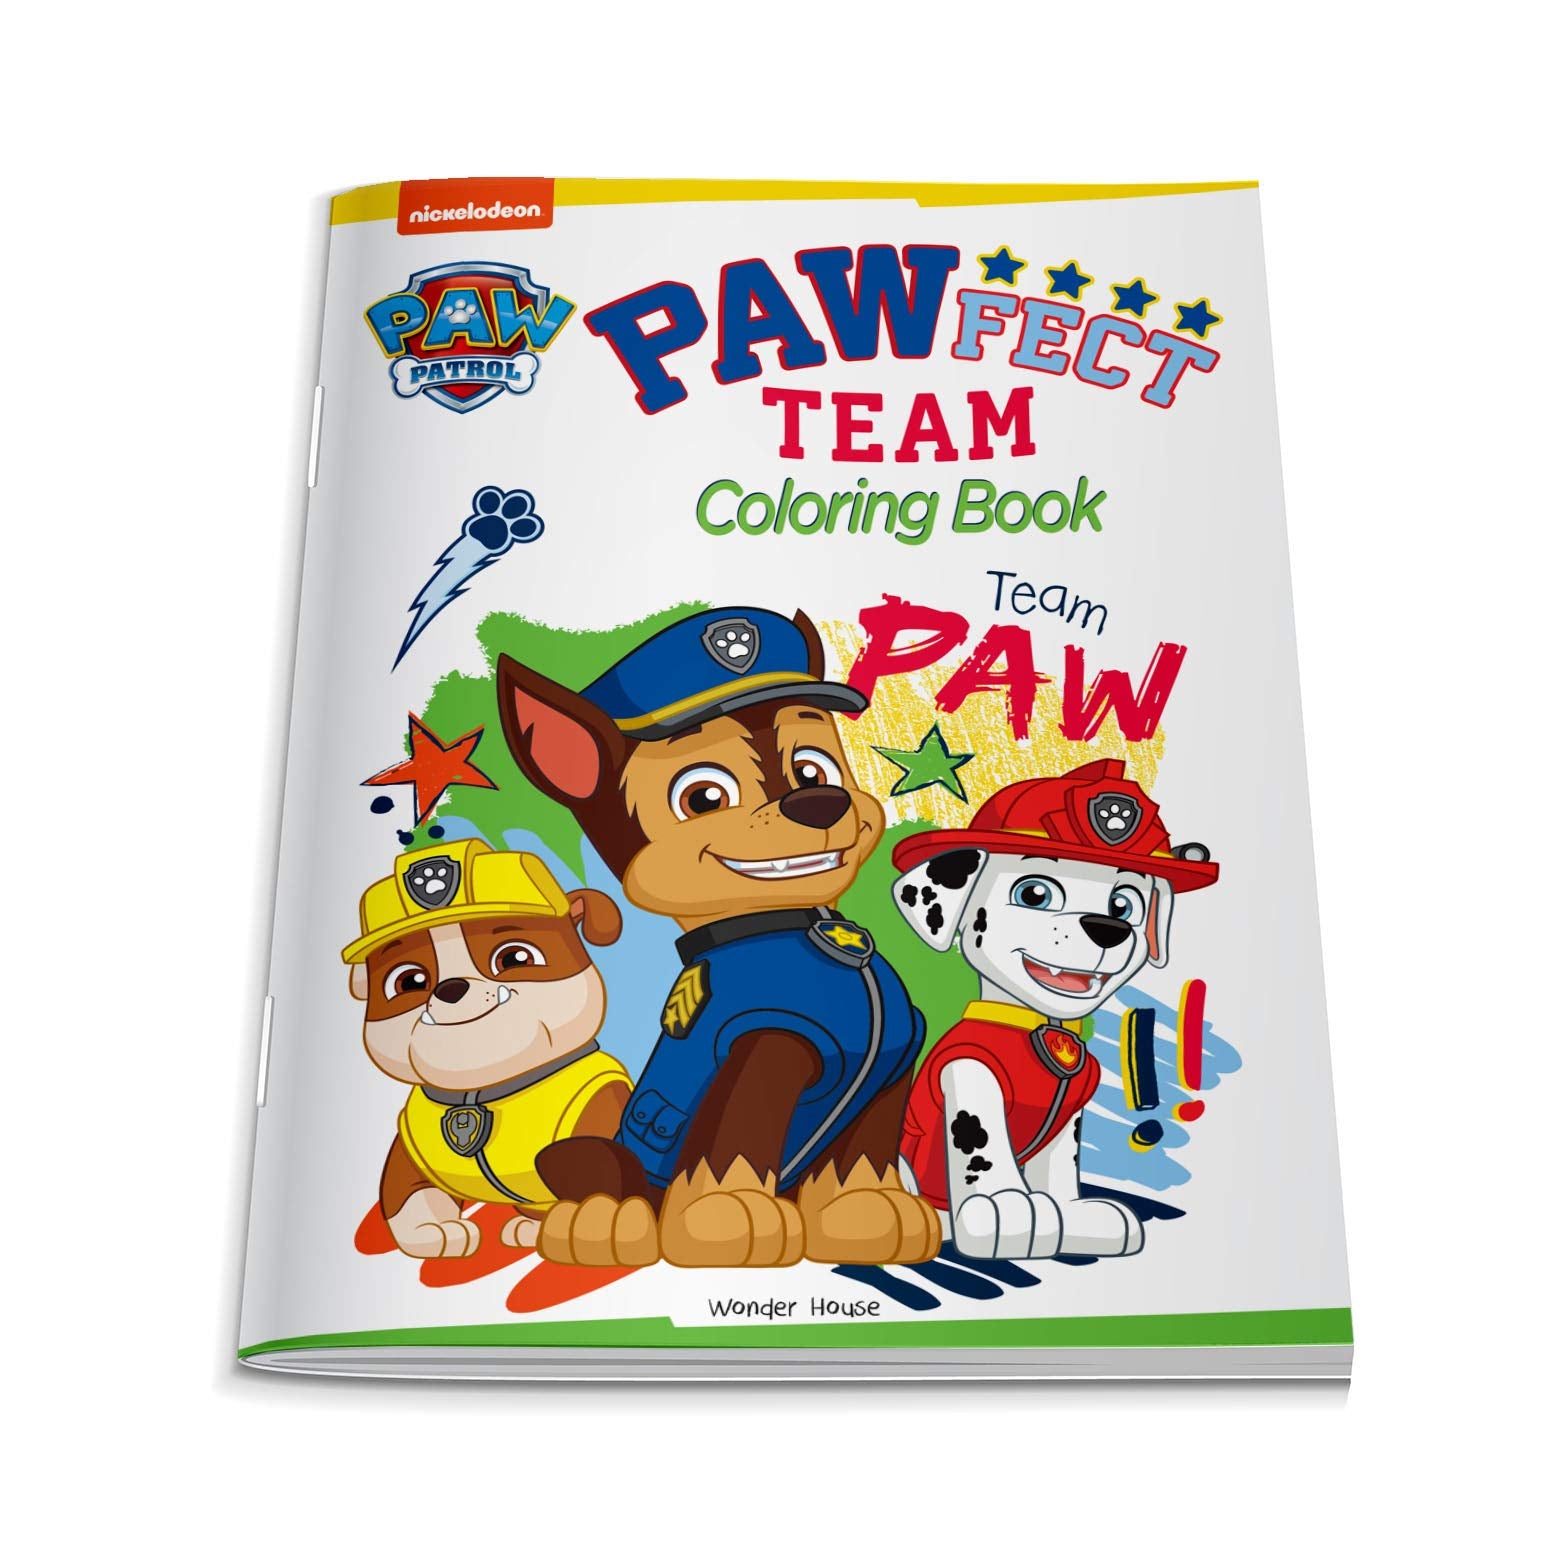 Pawfect Team: Paw Patrol Coloring Book For Kids